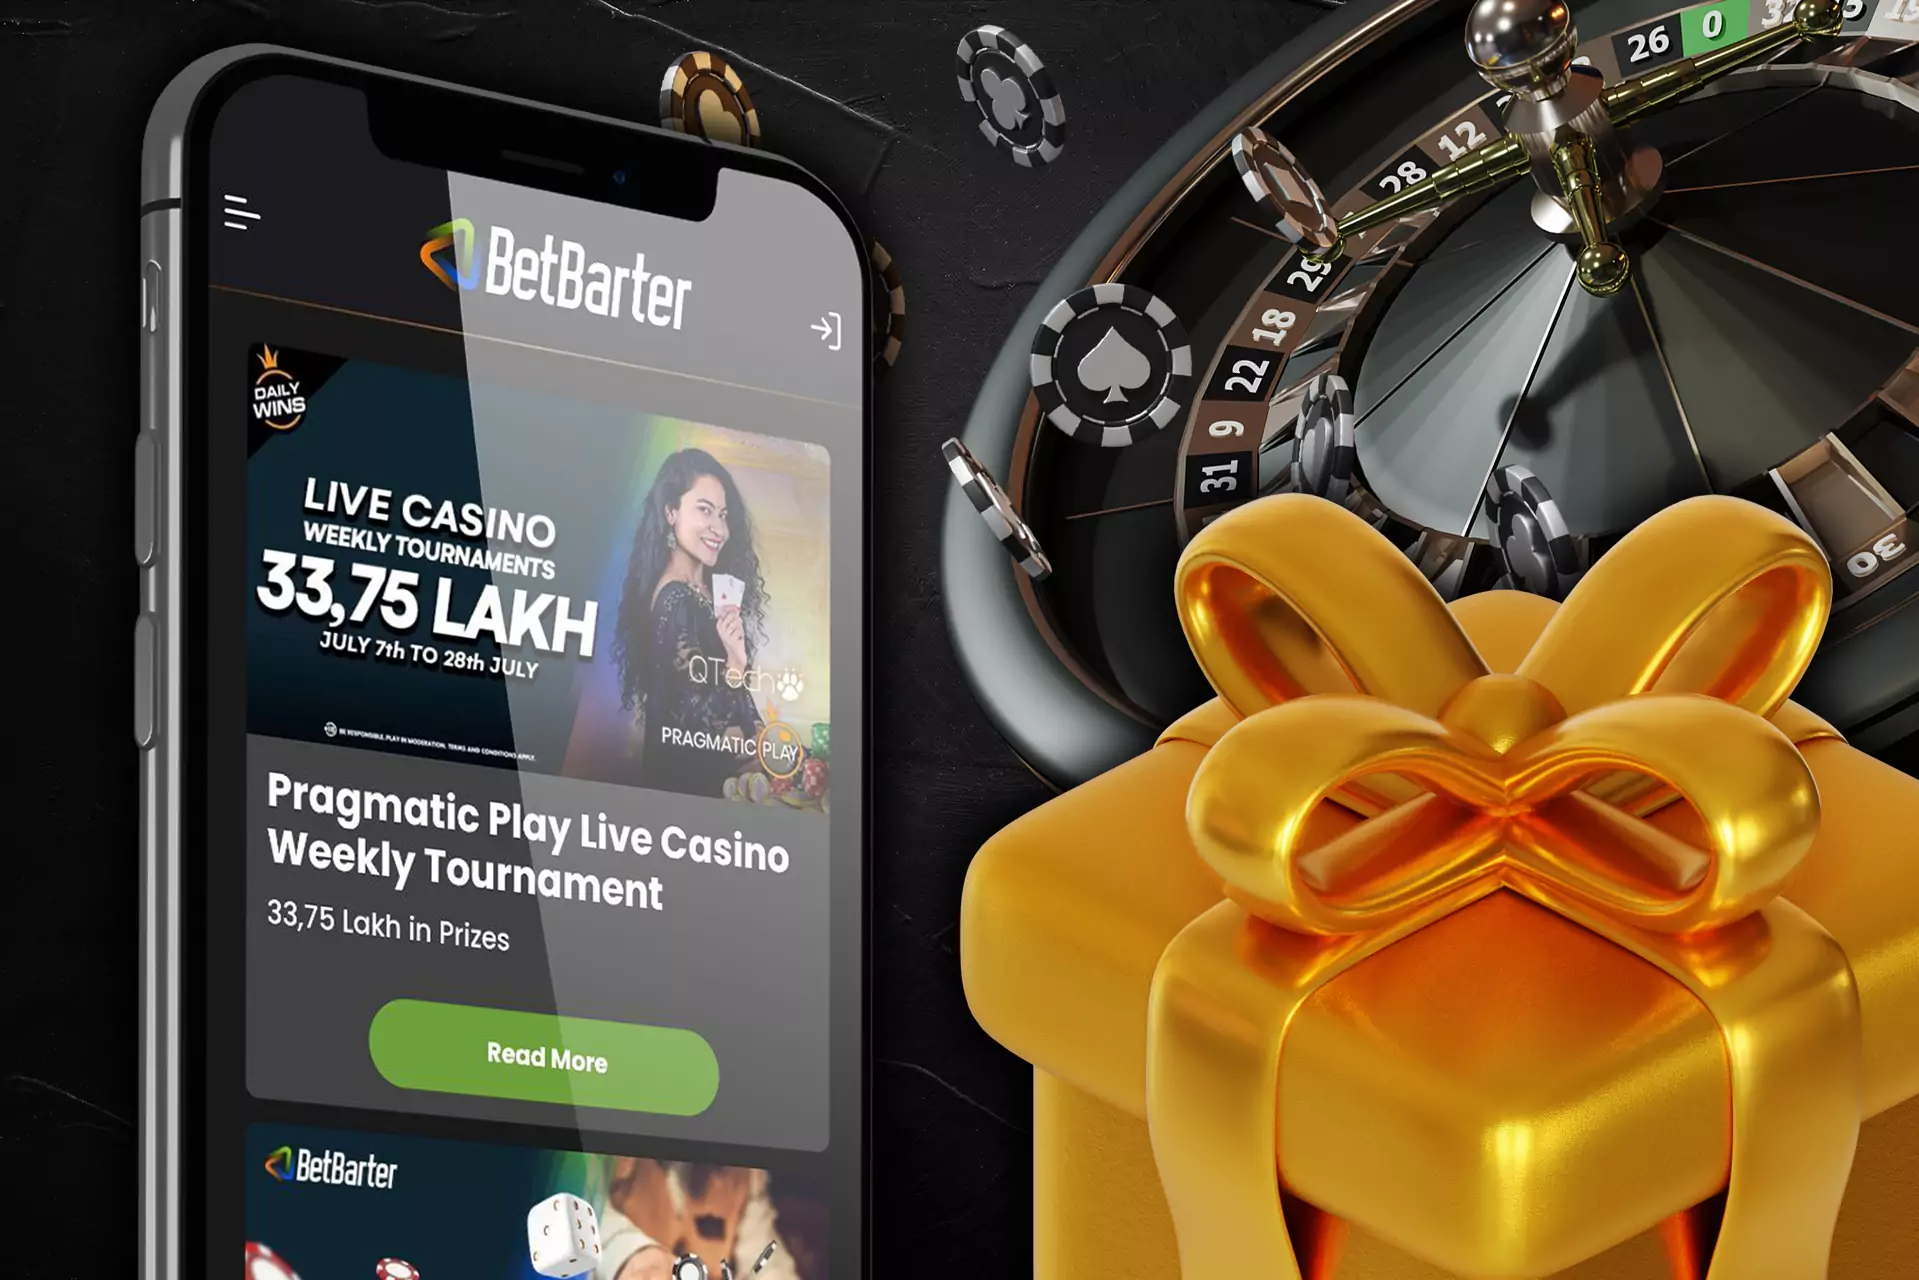 Online casino bonuses are available in the Betbarter app.